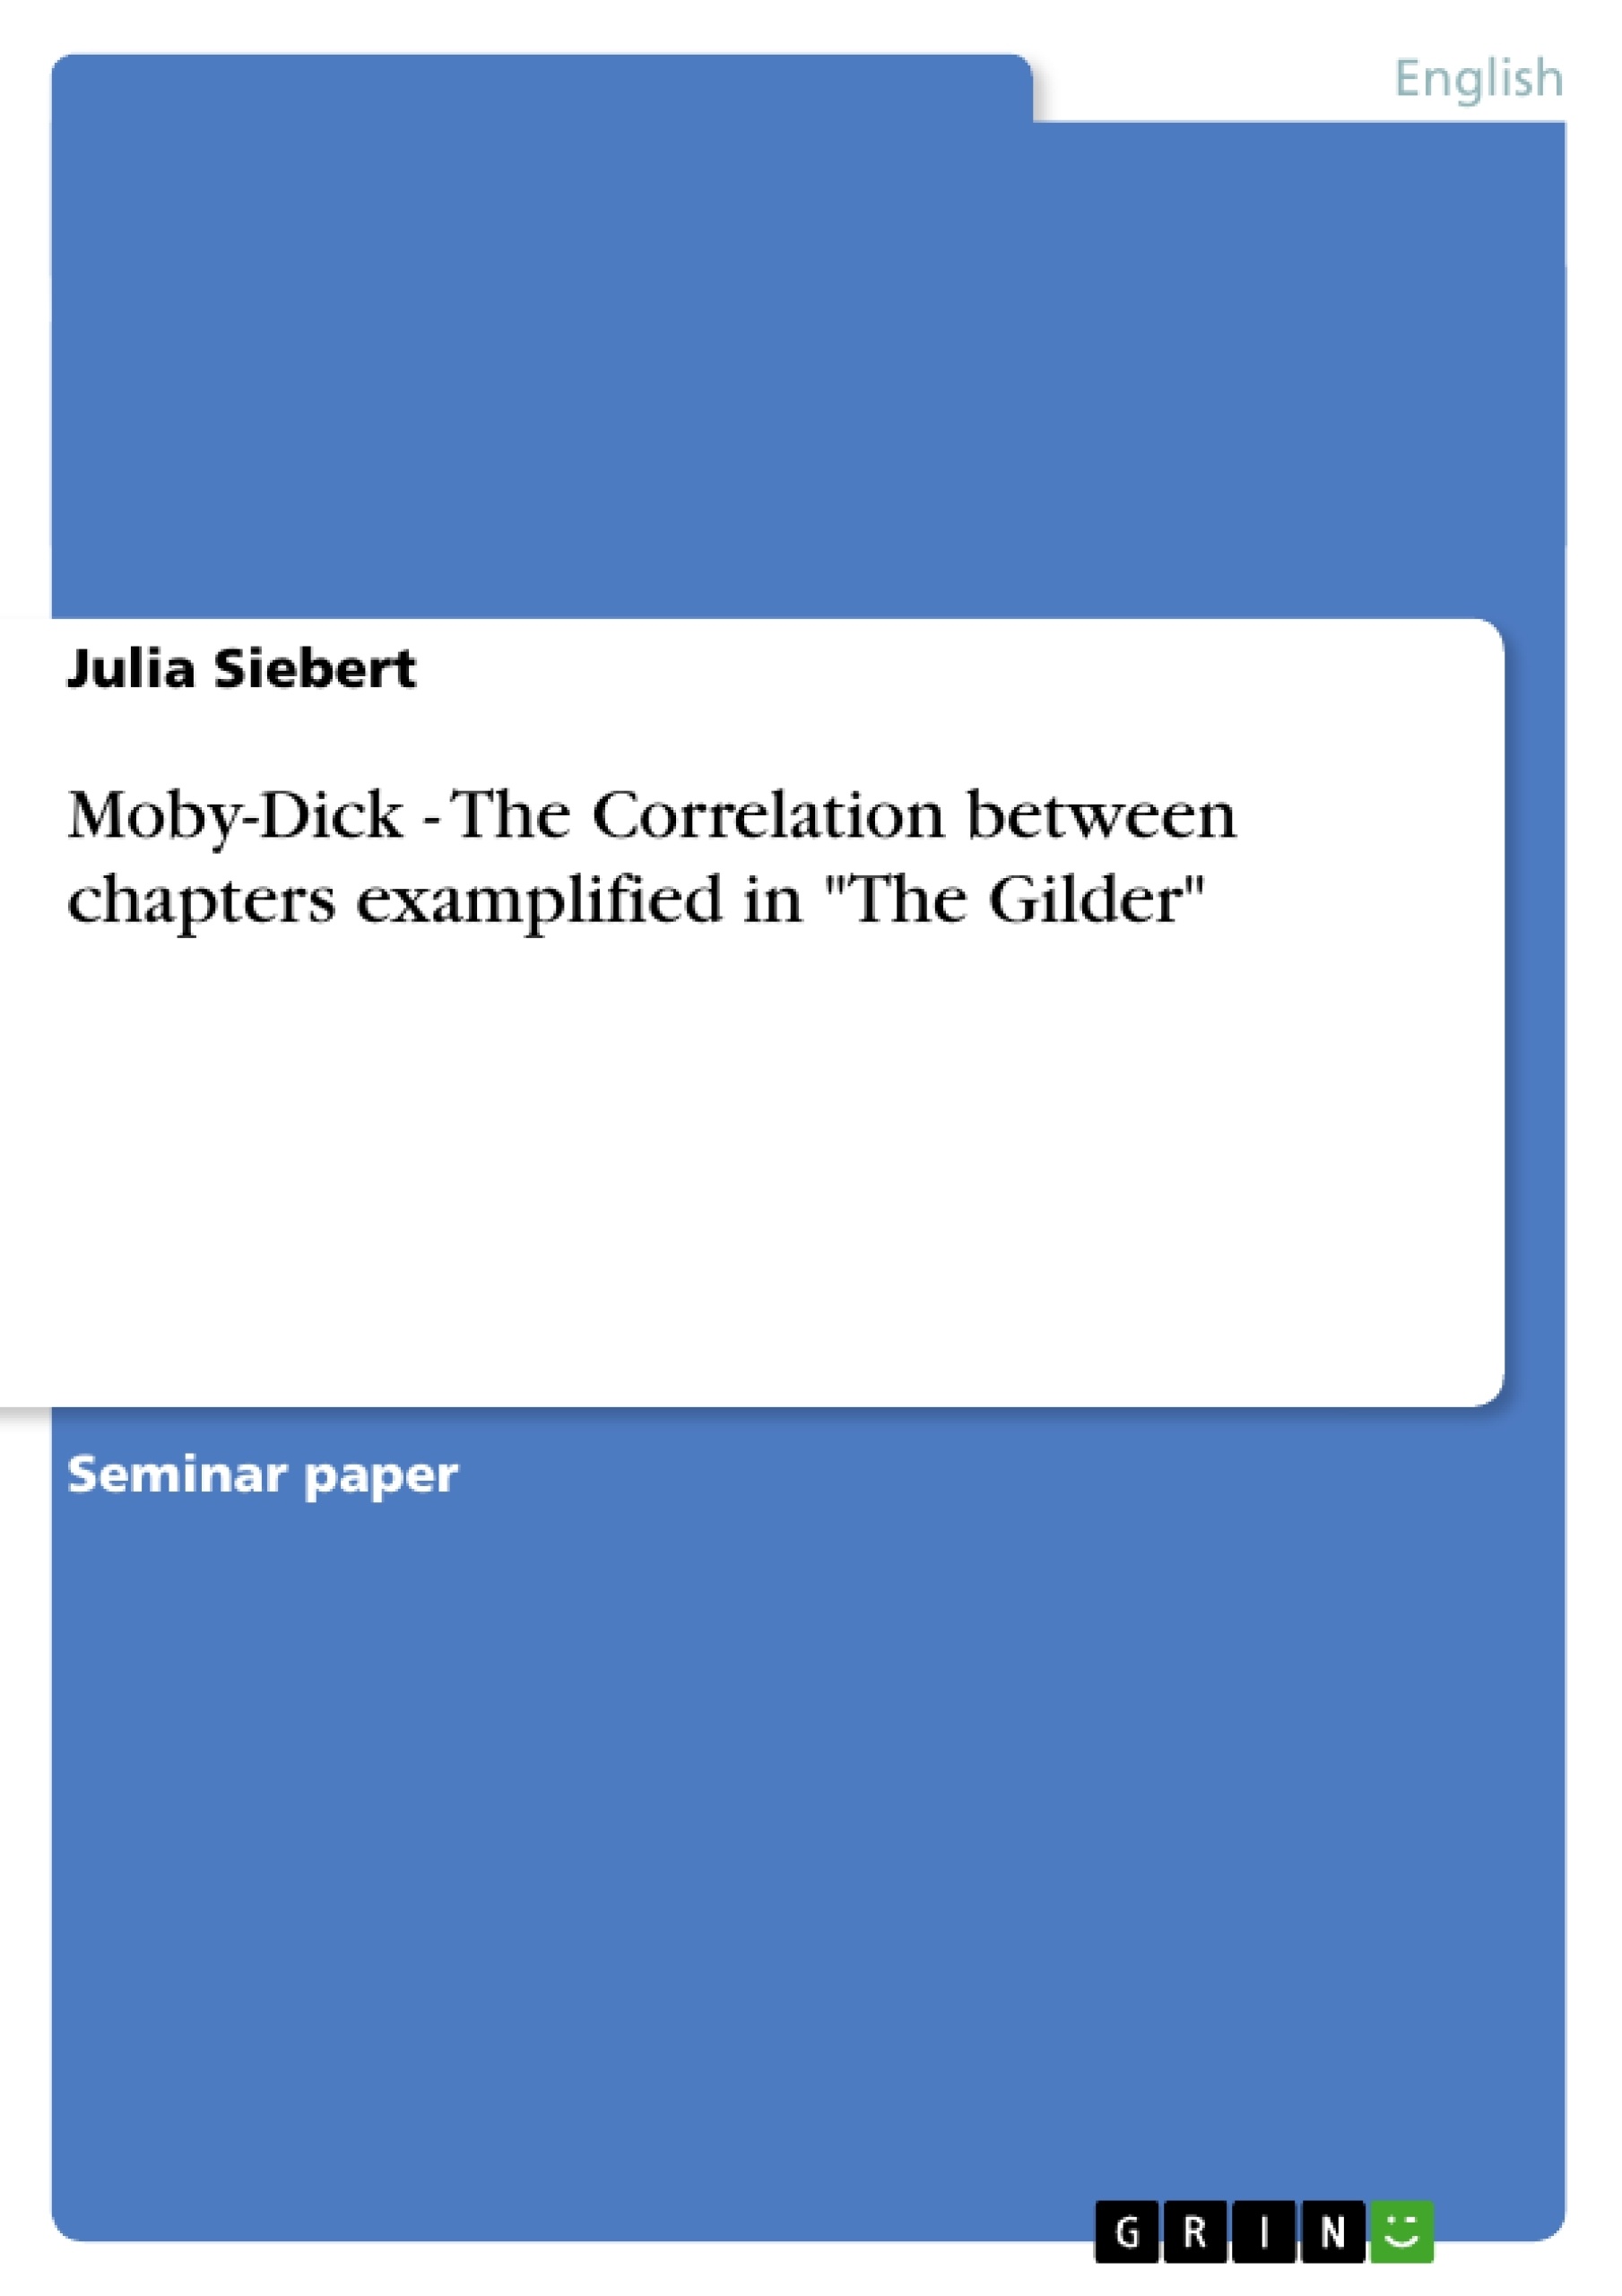 Título: Moby-Dick - The Correlation between chapters examplified in "The Gilder"